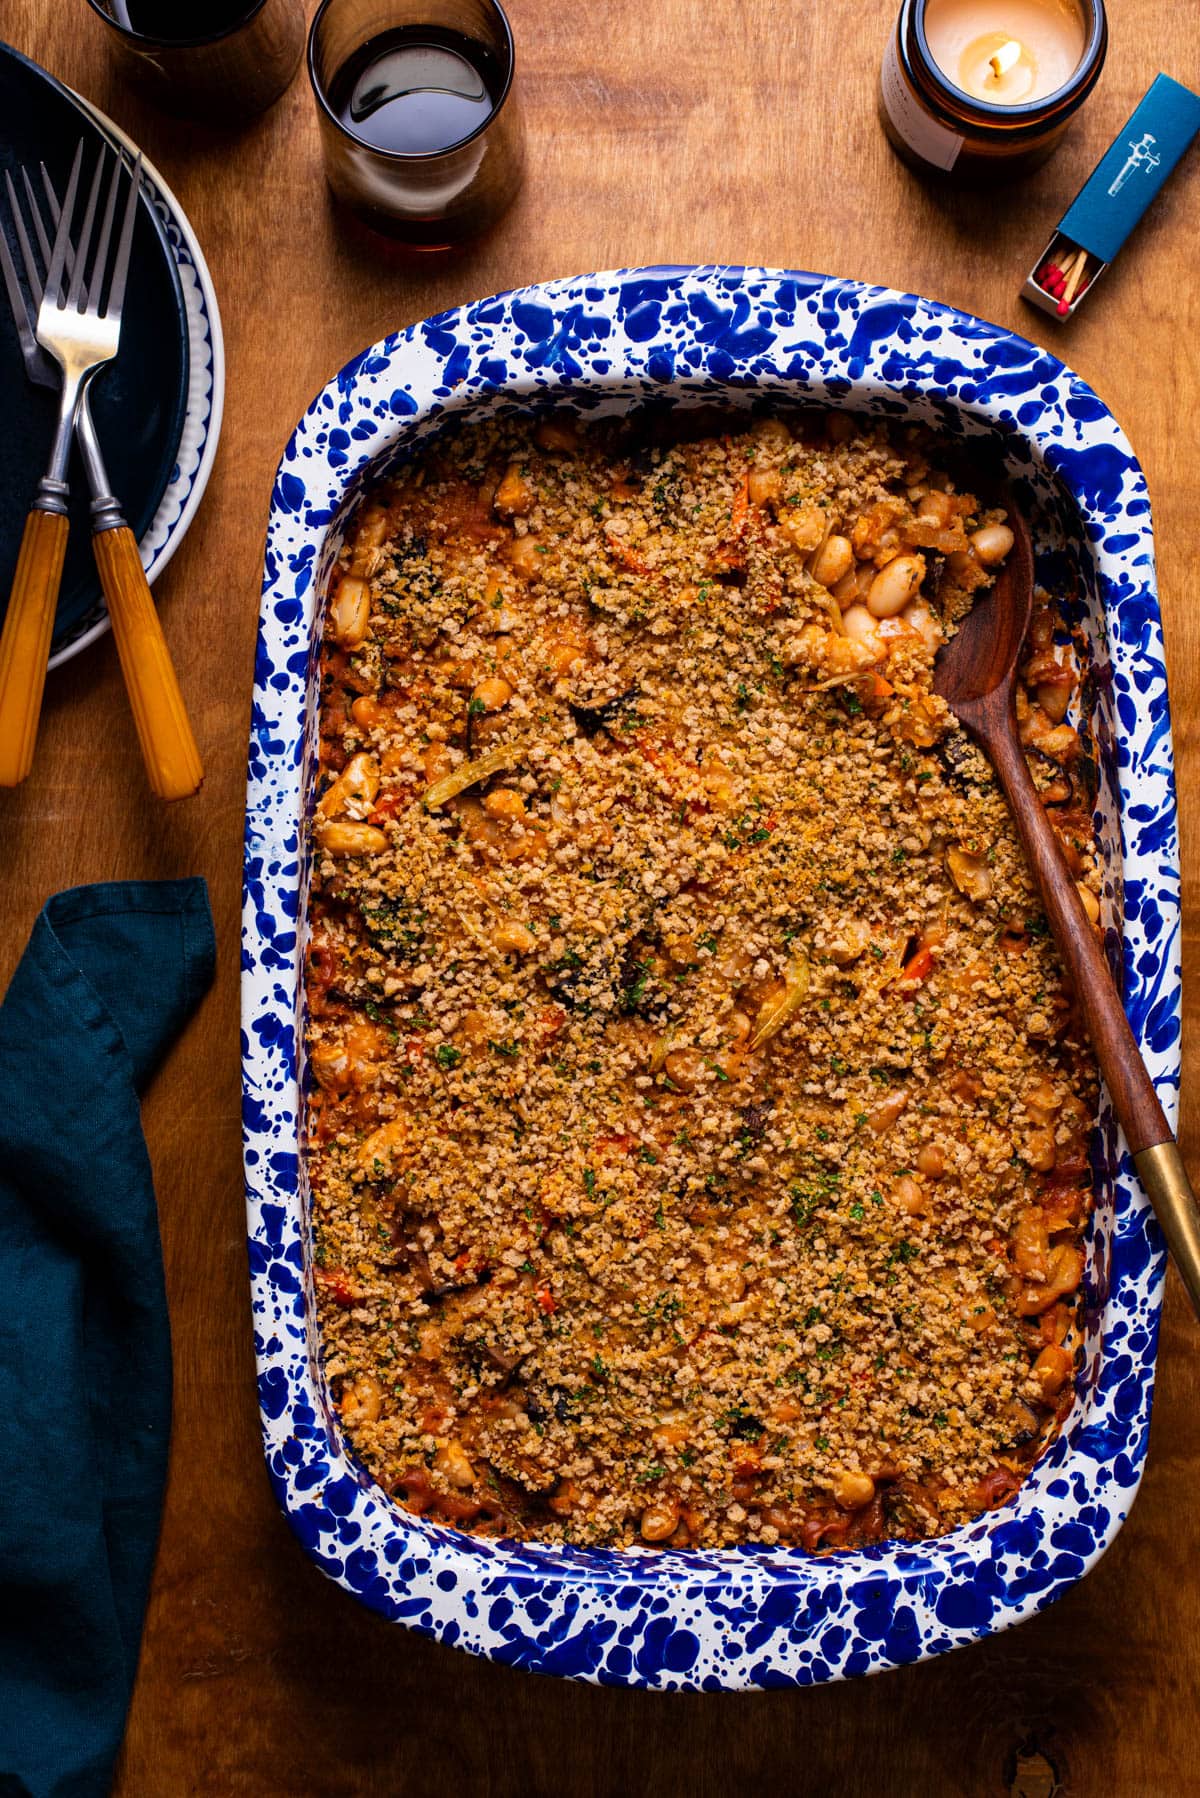 A glass Pyrex casserole dish of vegan cassoulet next to 2 ceramic plates on a beige tablecloth.